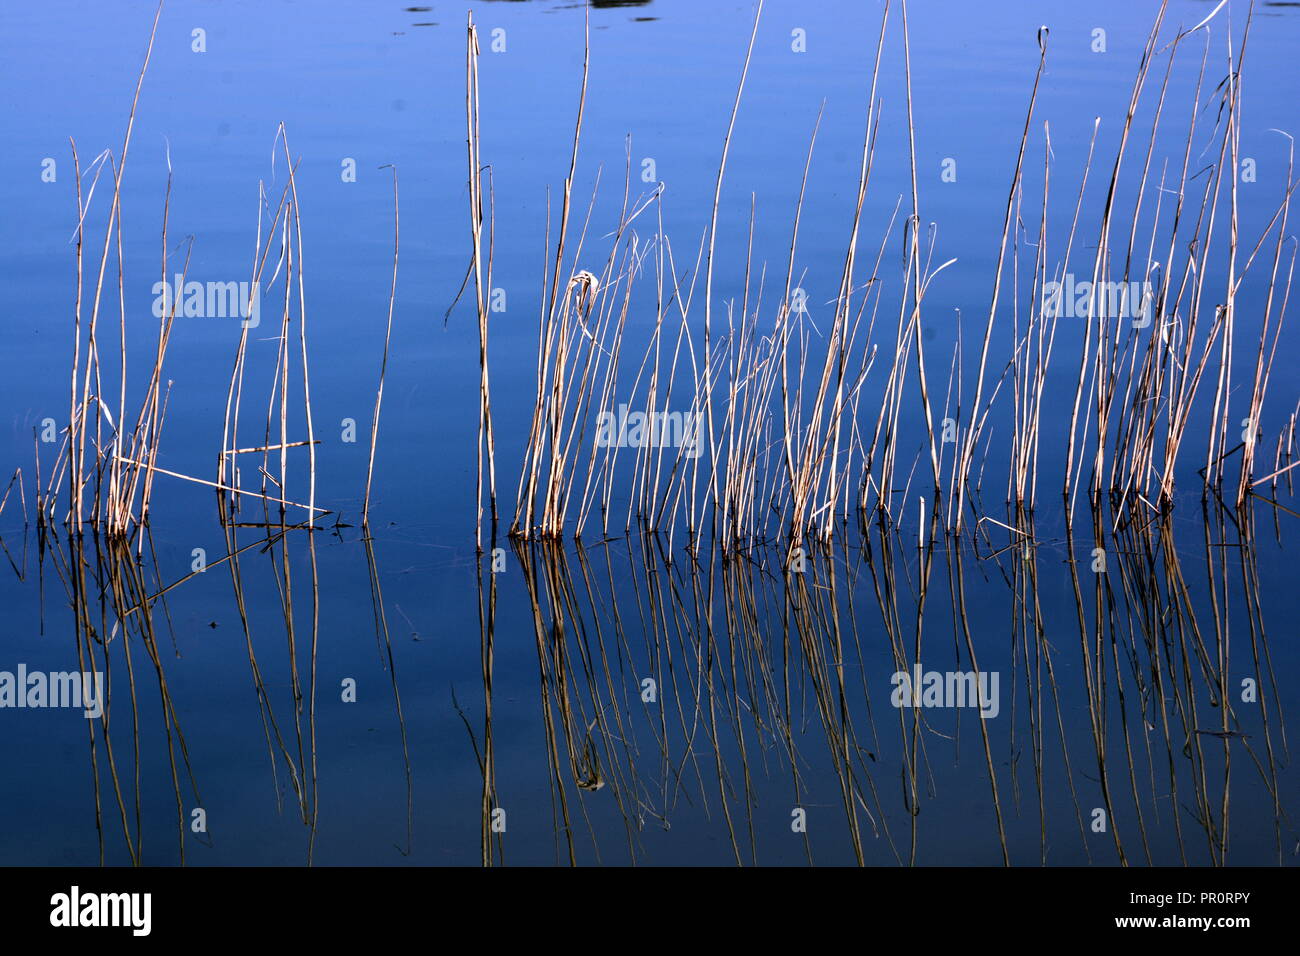 Schilfgras      reed or bamboo  in the water Stock Photo